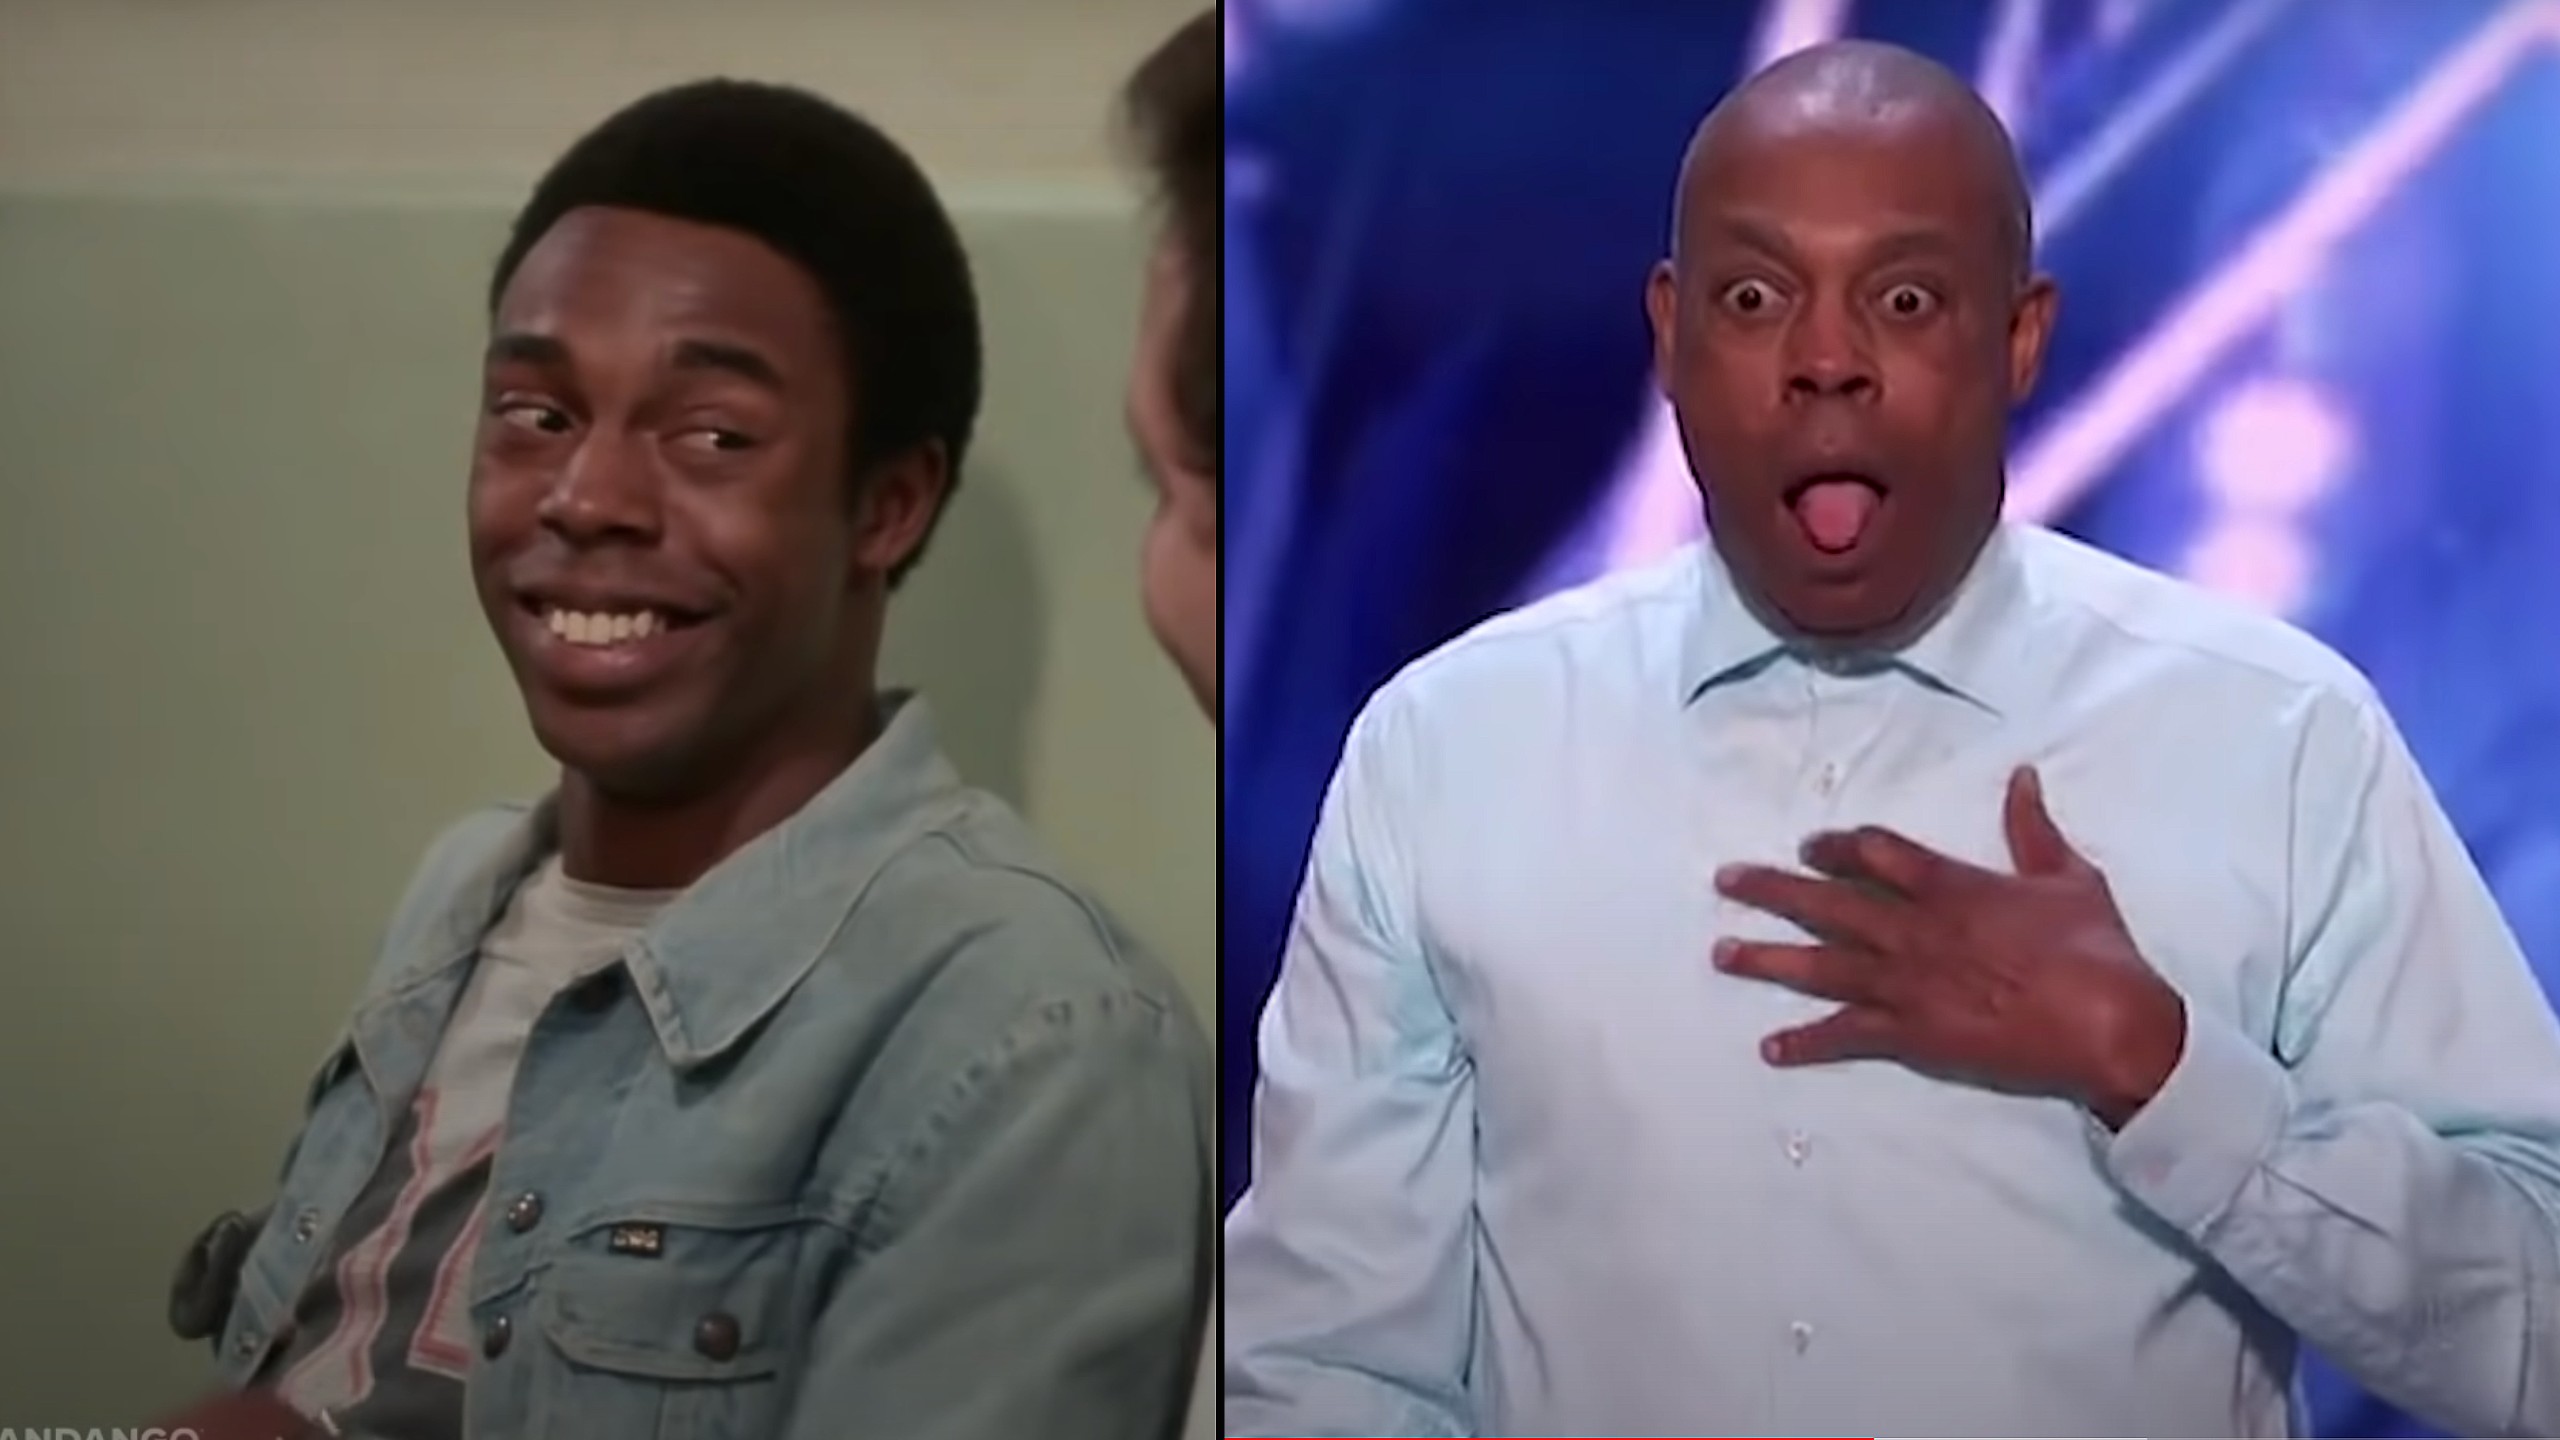 Michael Winslow Makes Epic Return After Taking Time Off to Raise Kids